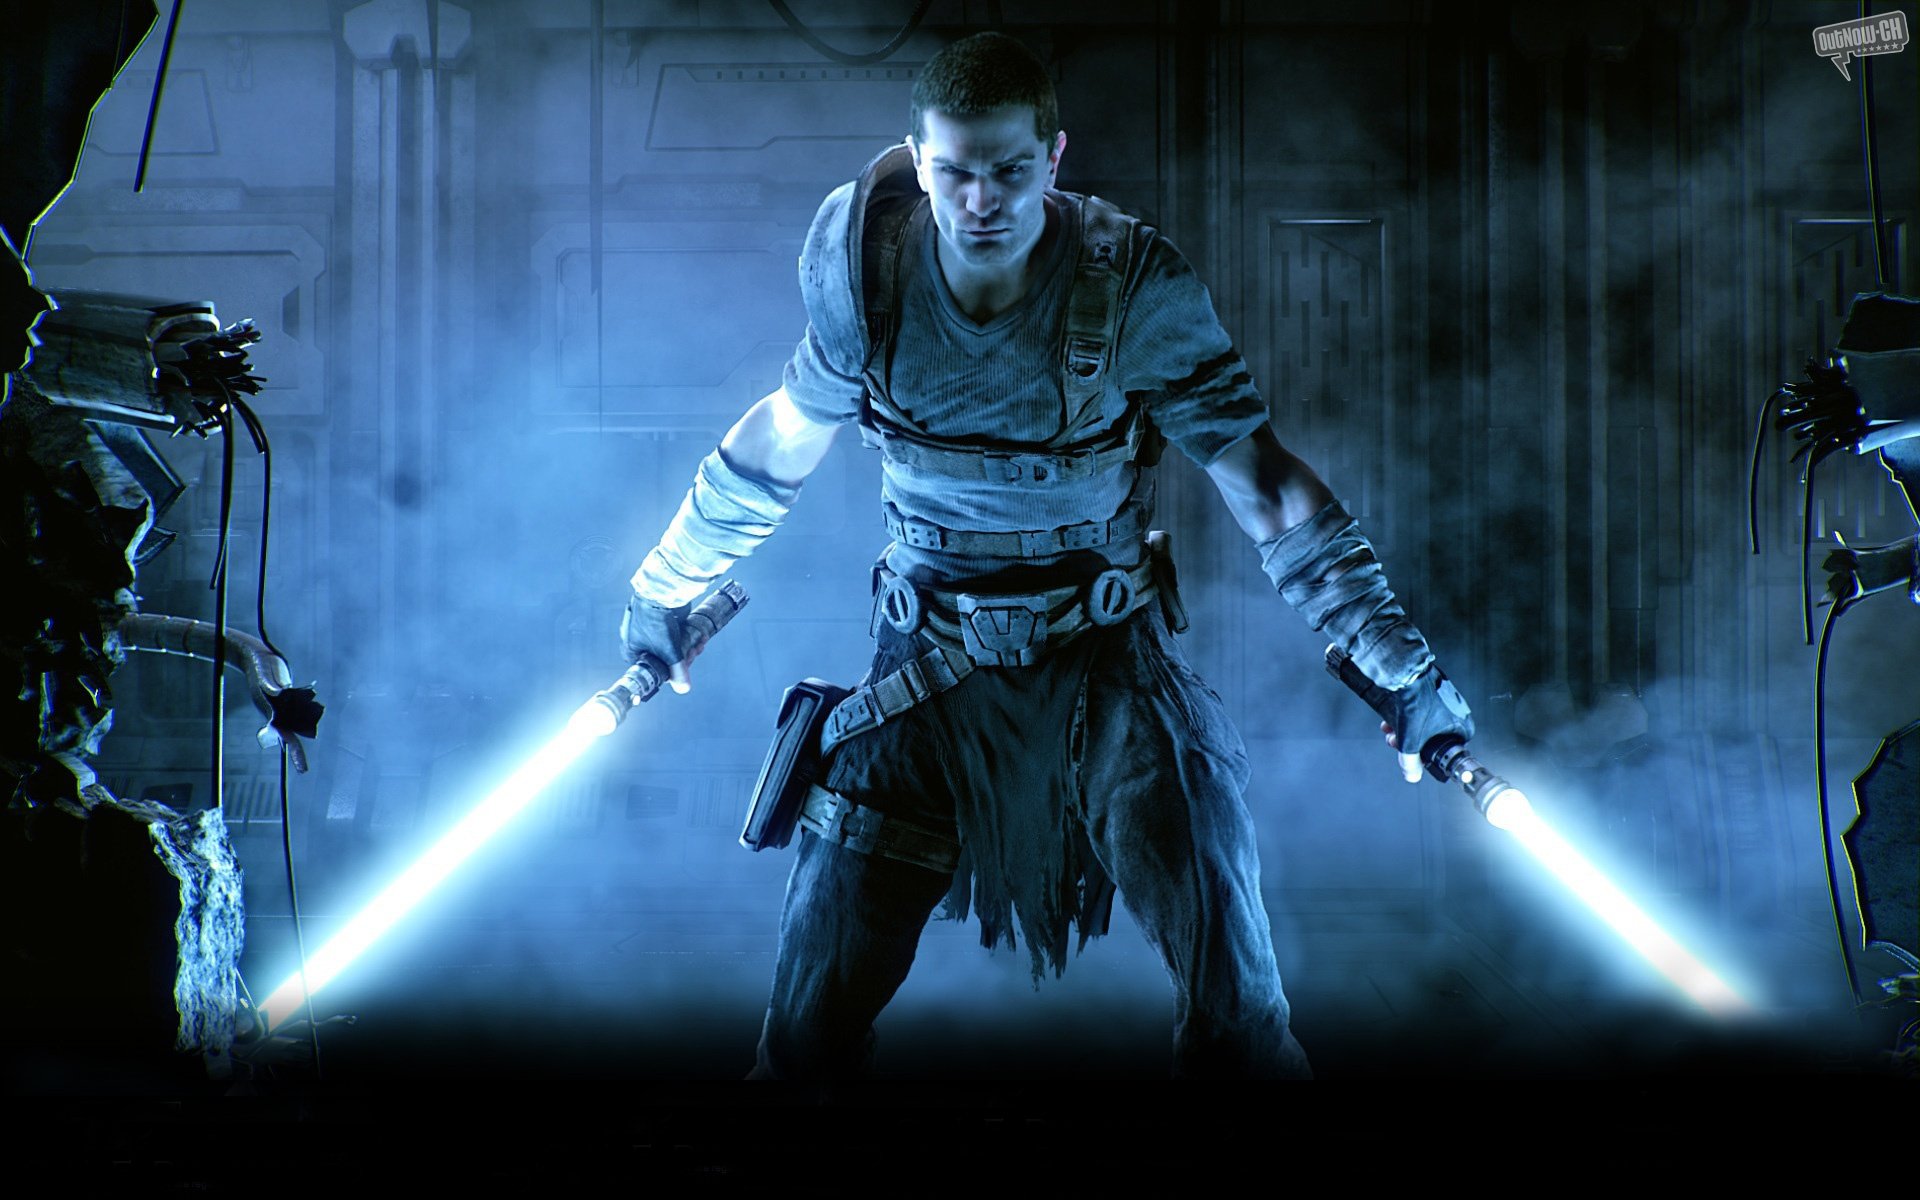 force wallpaper,action adventure game,pc game,darkness,action figure,fictional character